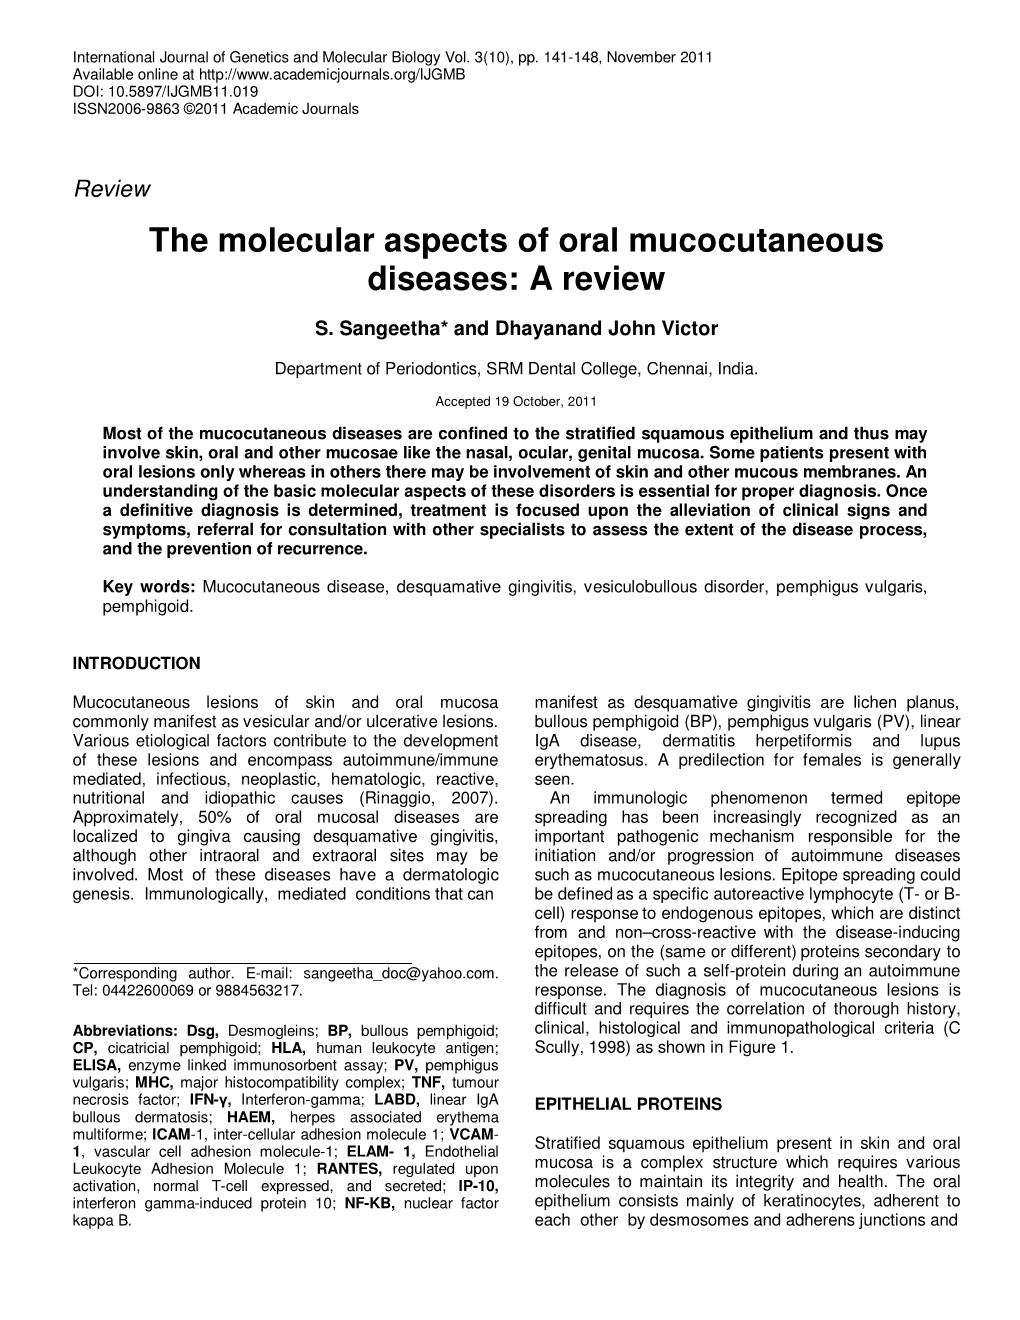 The Molecular Aspects of Oral Mucocutaneous Diseases: a Review